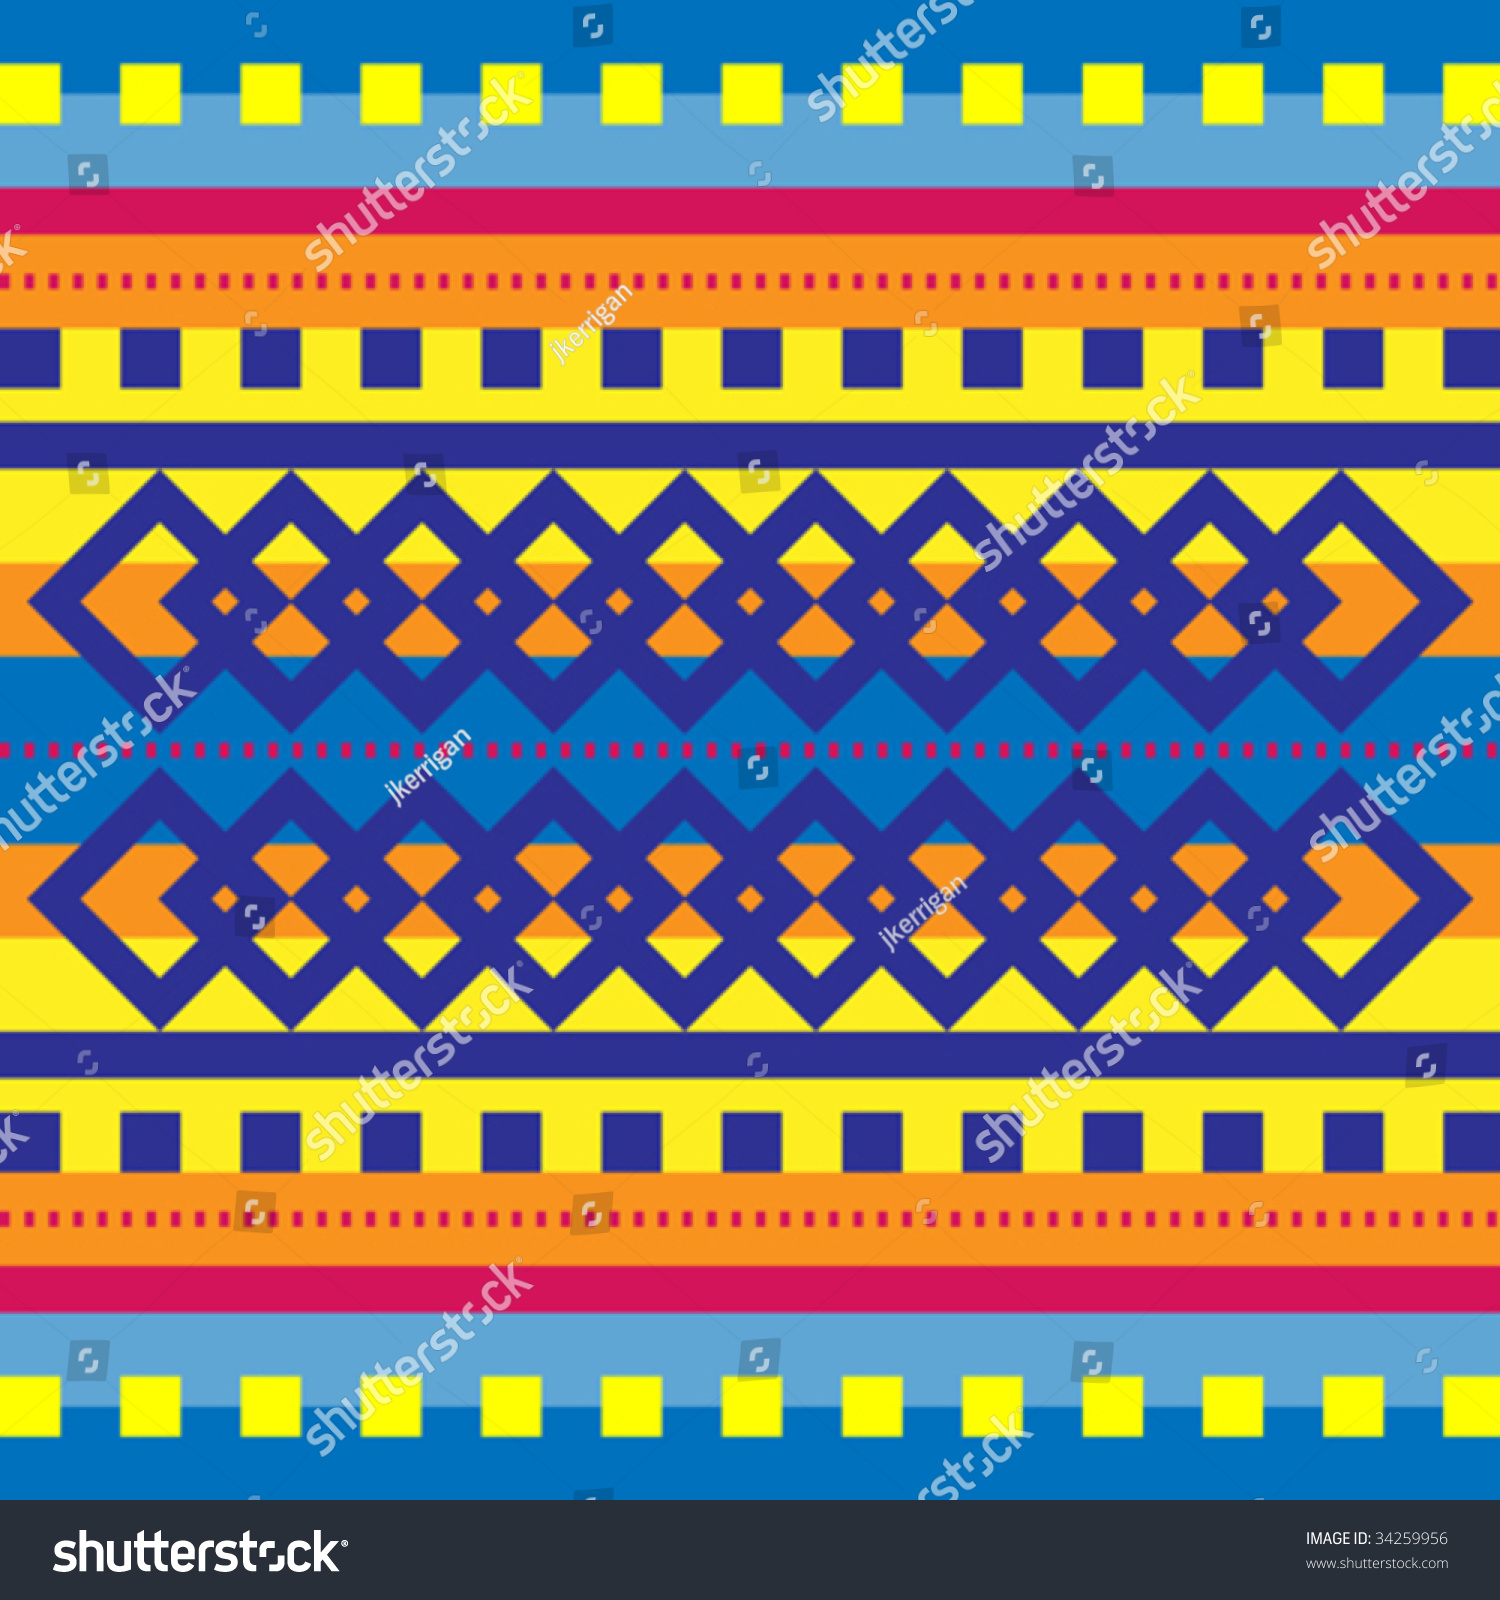 Vector Background With Colorful Southwestern Design - 34259956 ...